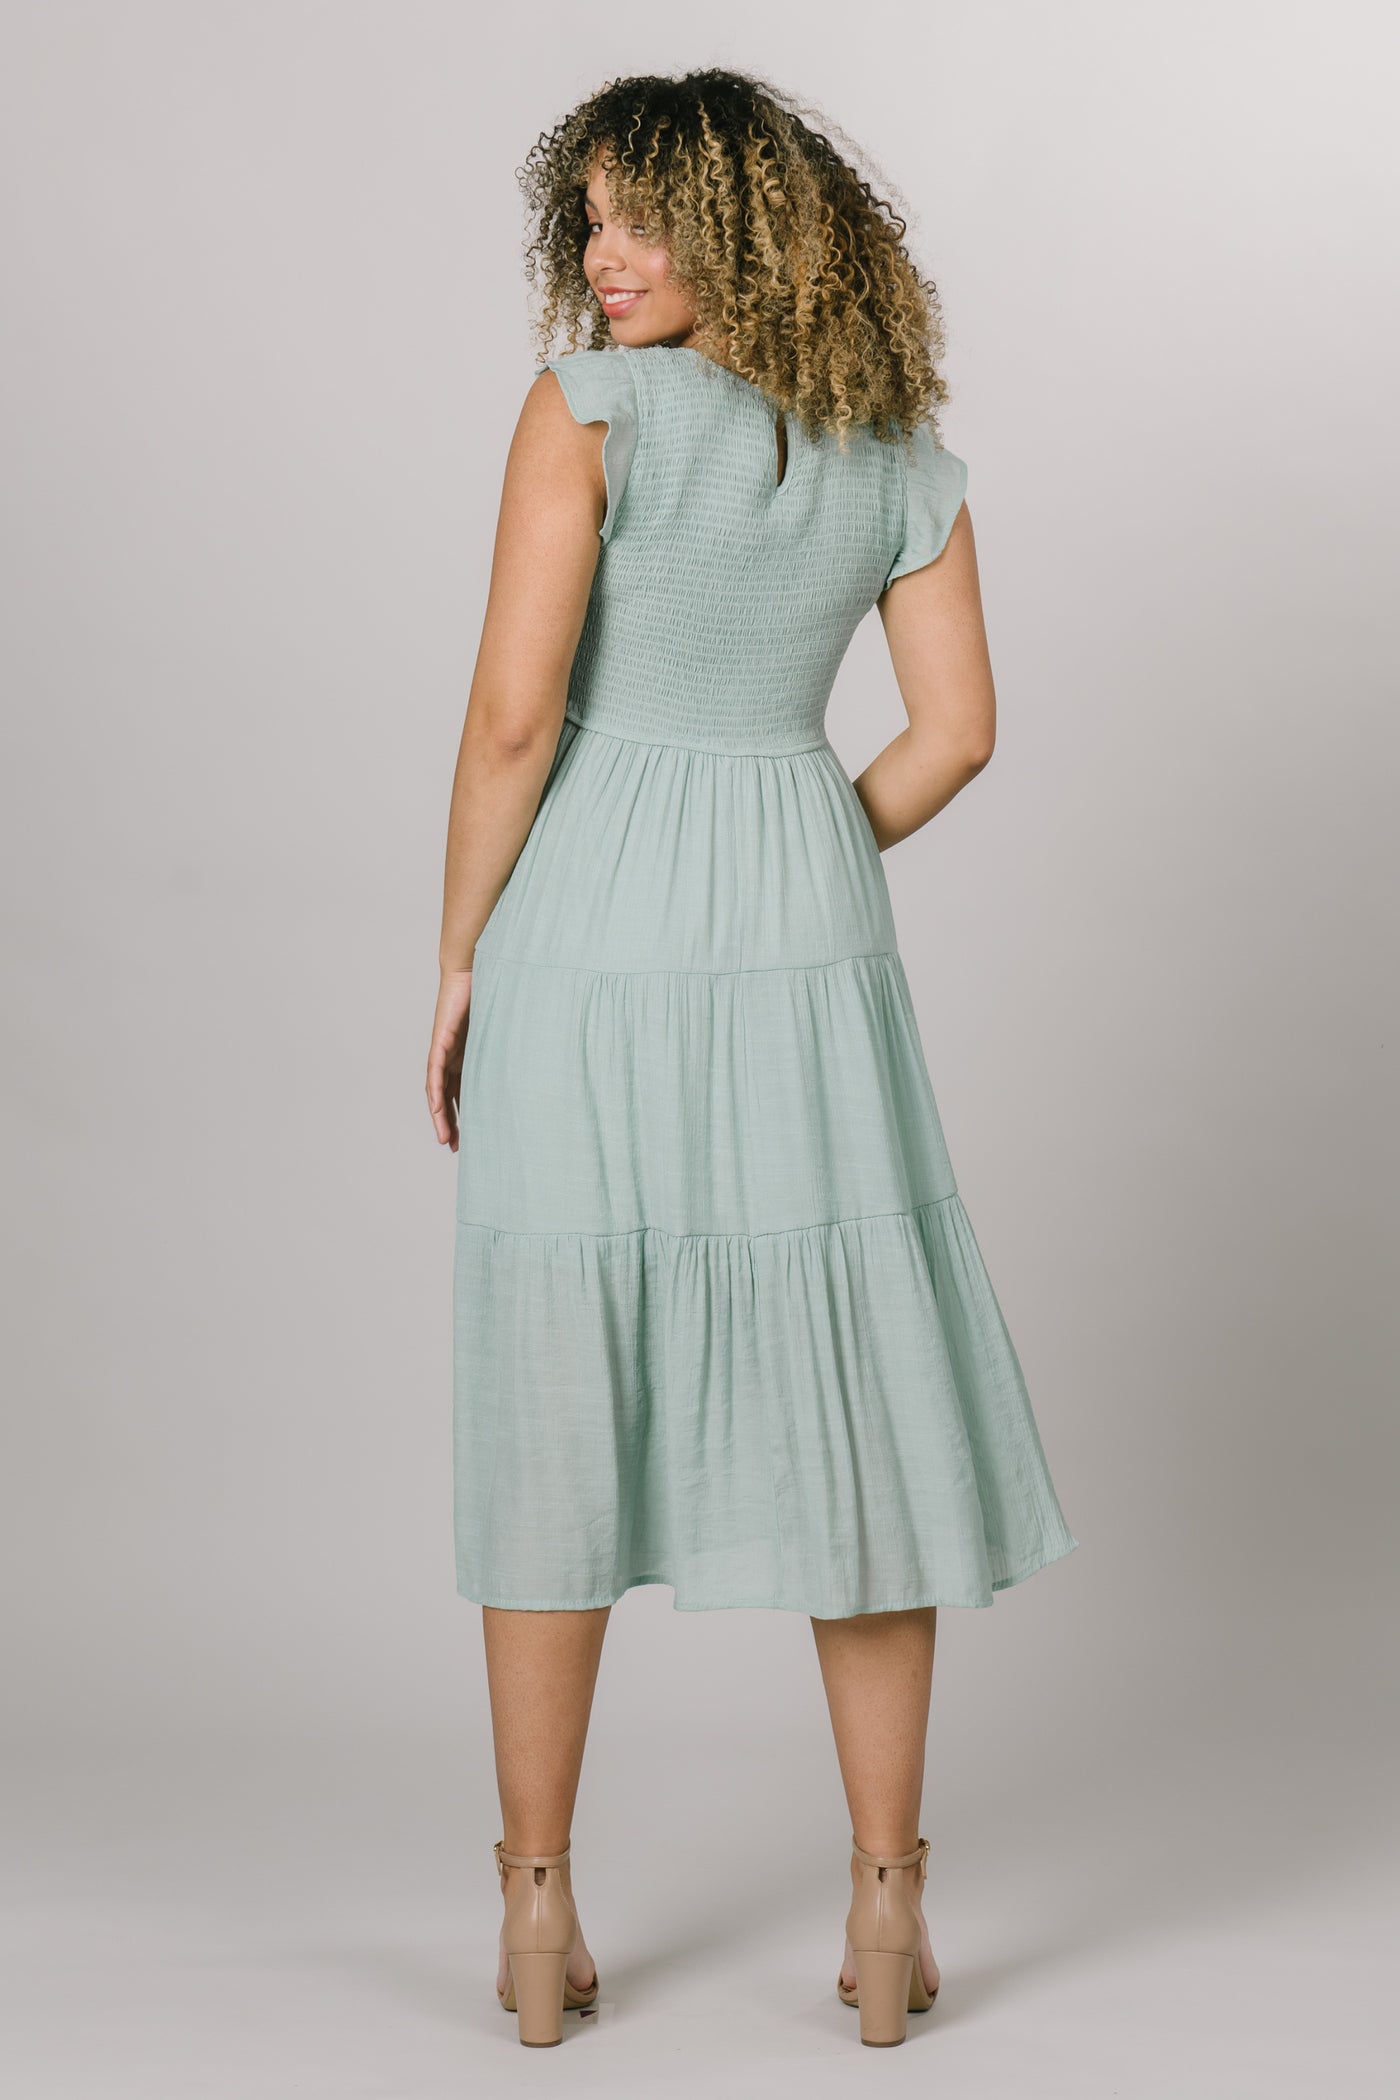 Back view of the dress with  smocked bodice and short sleeves. Modest Dresses - - Everyday Dresses - Modest Prom Dress - Formalwear Modest Dresses - Bridesmaid Modest Dresses.